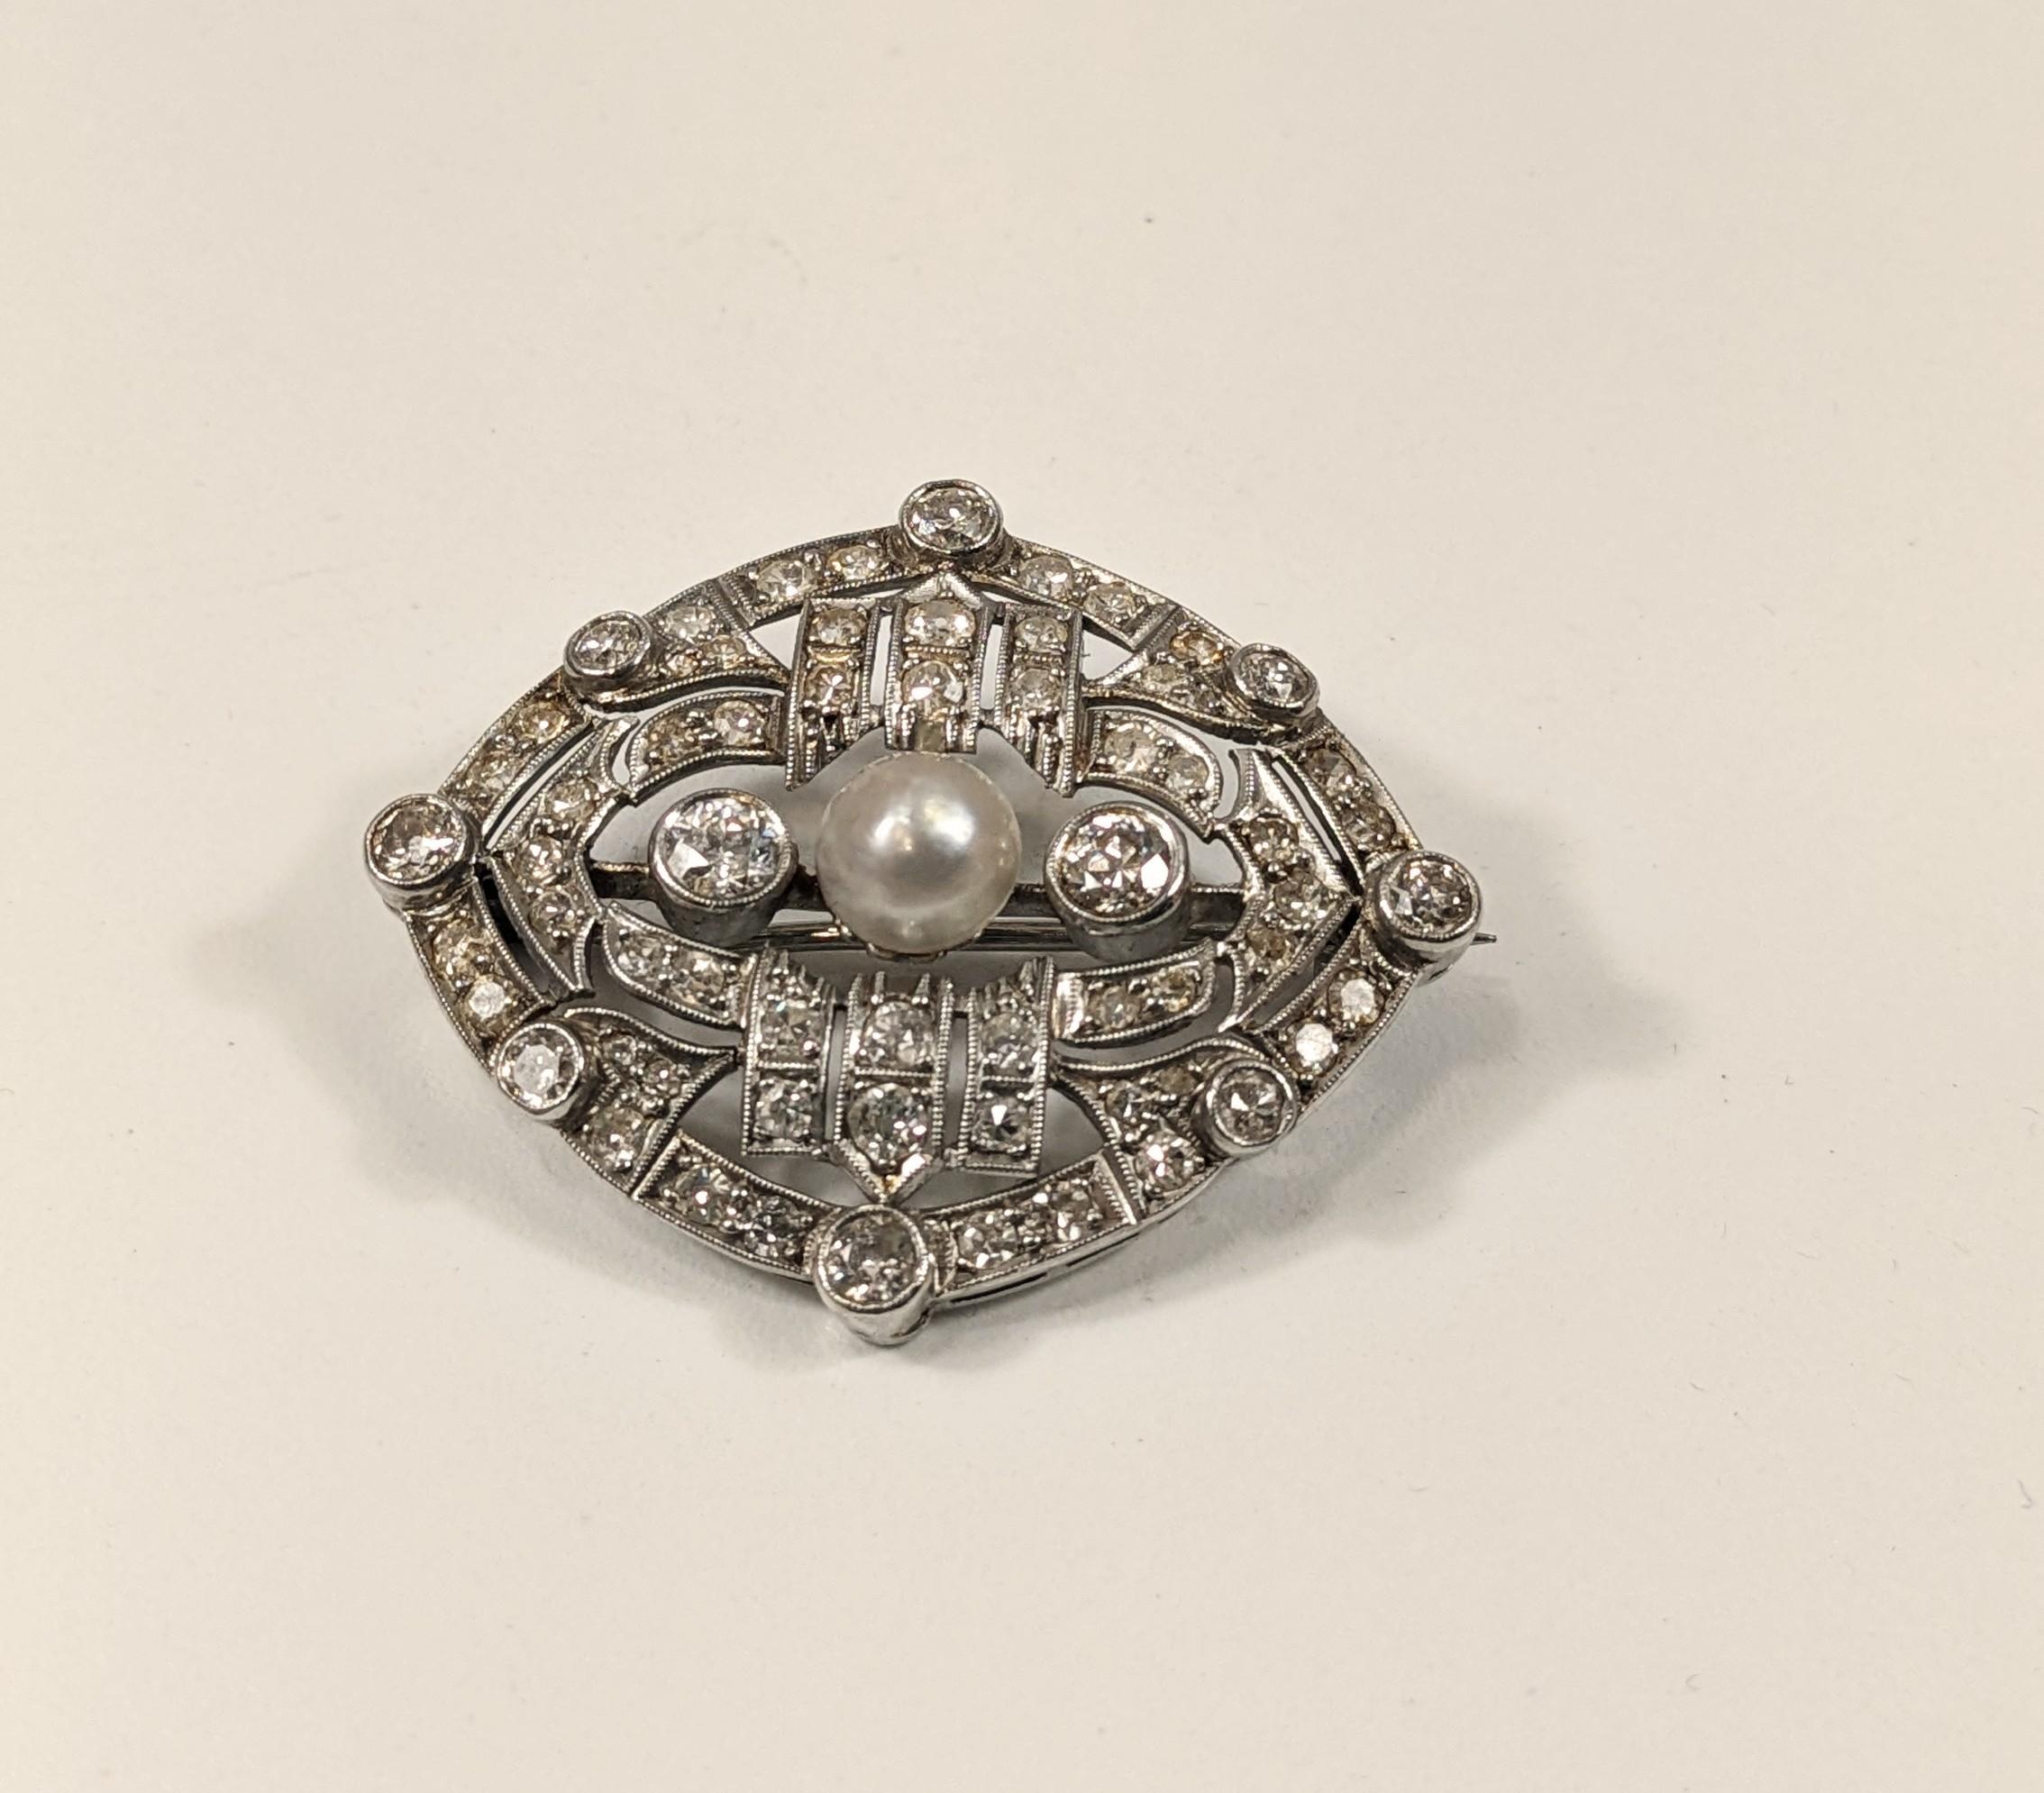 
Elizabethan style platinum brooch with antique cut white diamonds and natural pearl in the center

READY TO SHIP
*Shipment of this piece is not affected by COVID-19. Orders welcome!

MATERIAL
◘ Weight 11,3 grams 
◘ Size 30mm x 35mm / 1,18 x 1,37